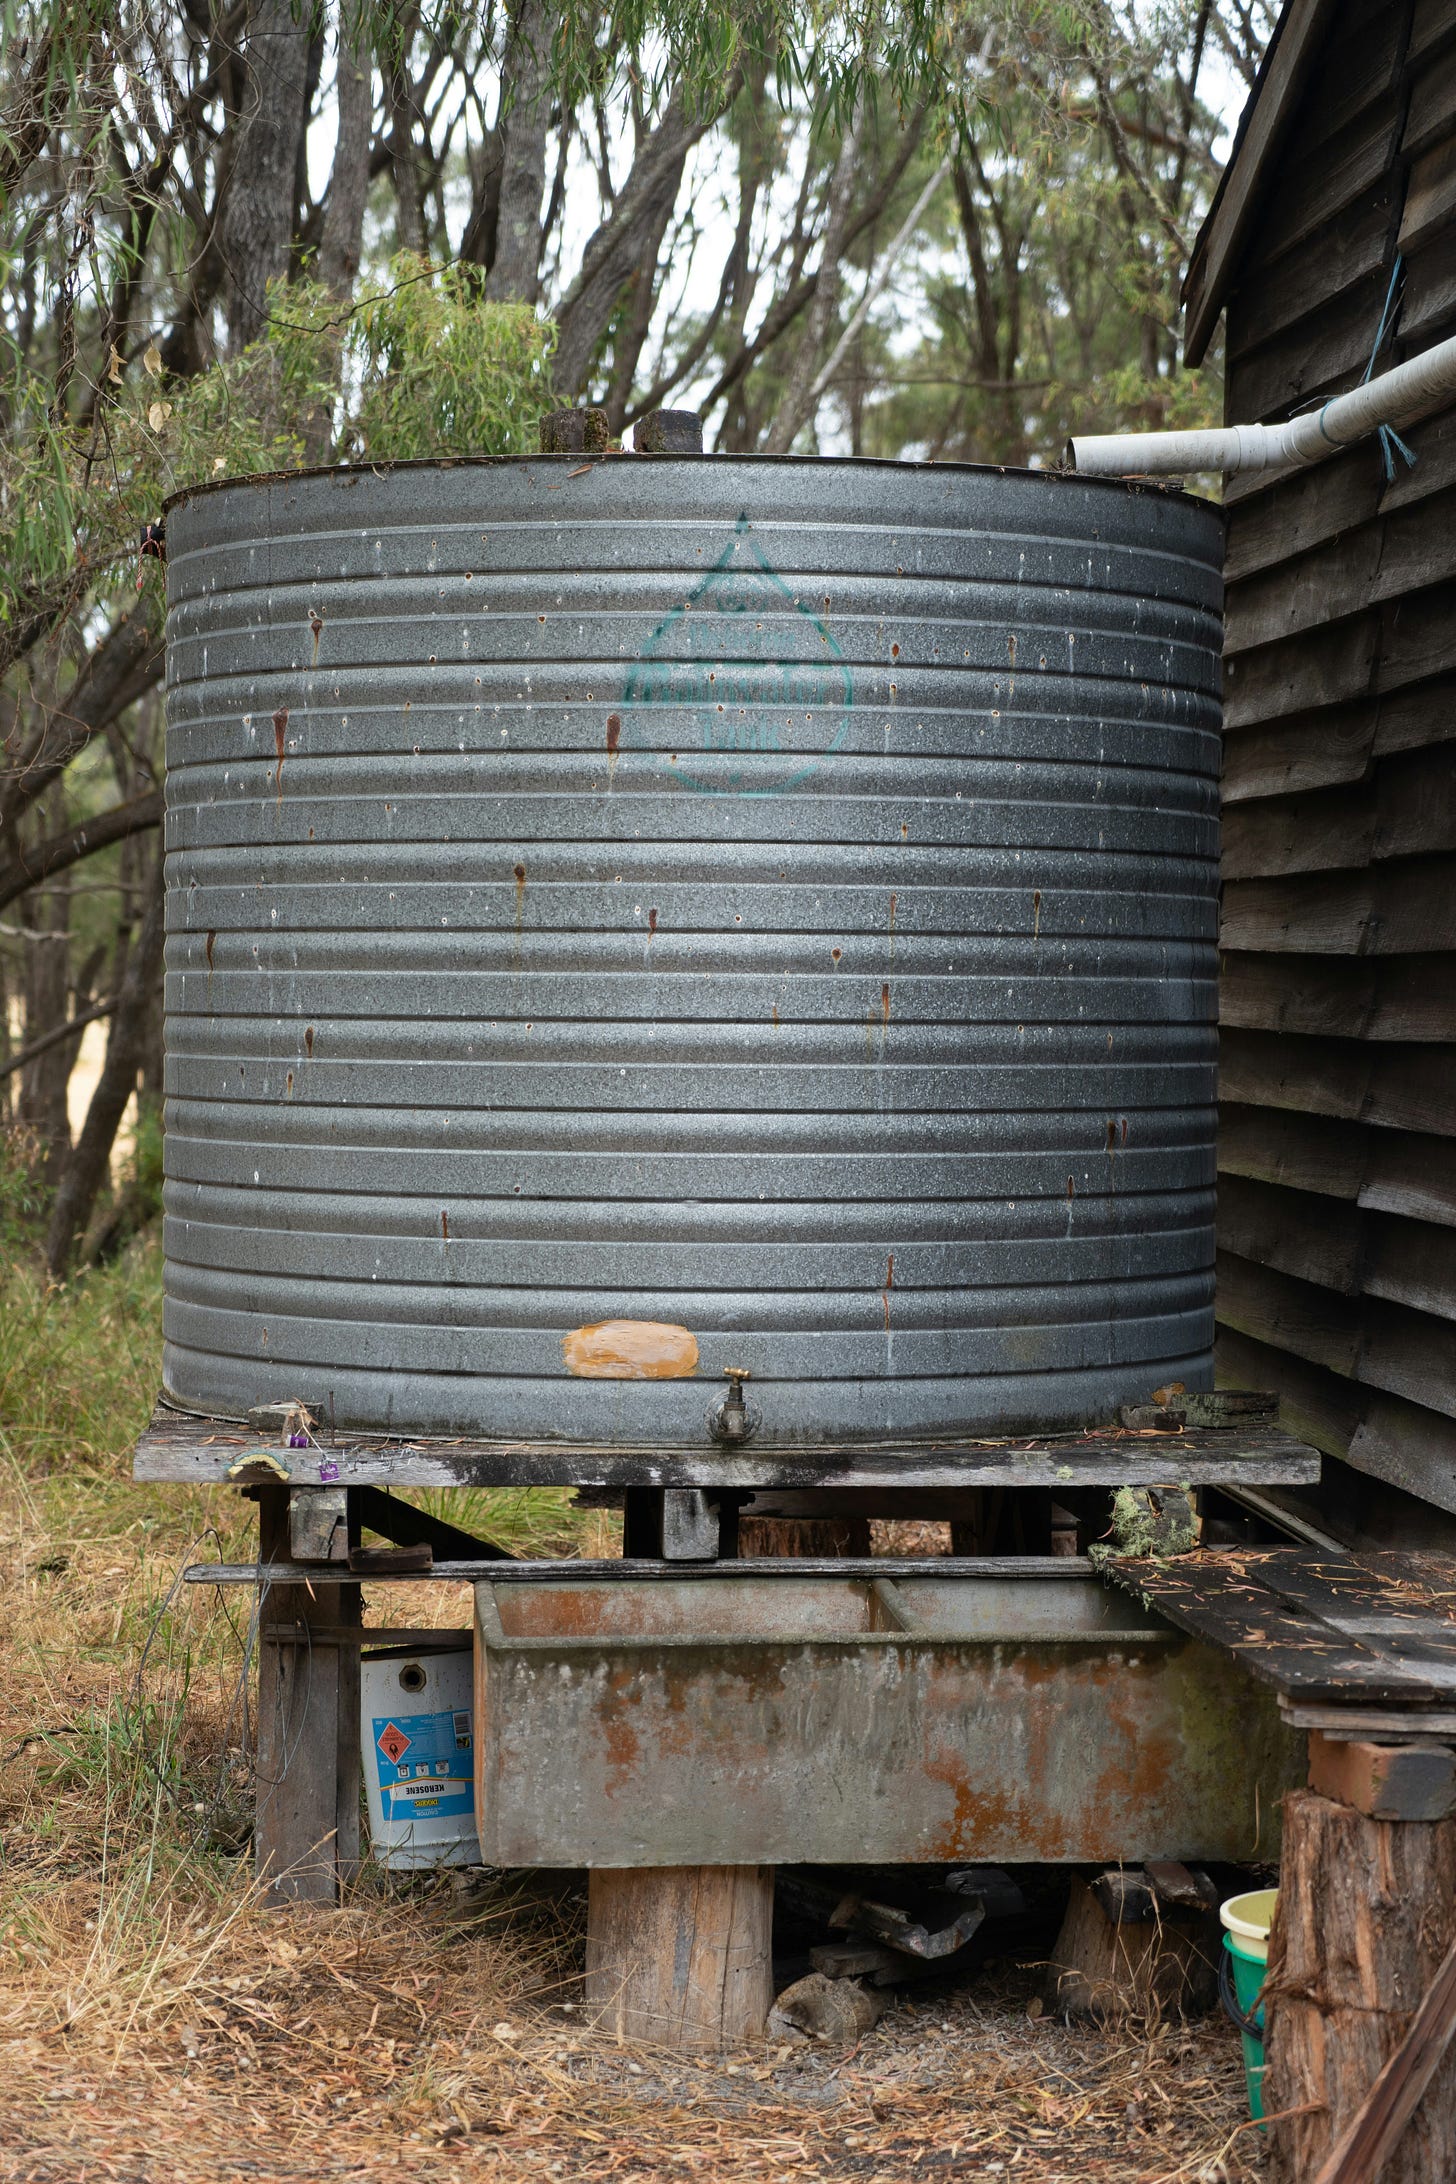 A large, round metal container sits atop a wooden stand. A rain pipe ends just above the container